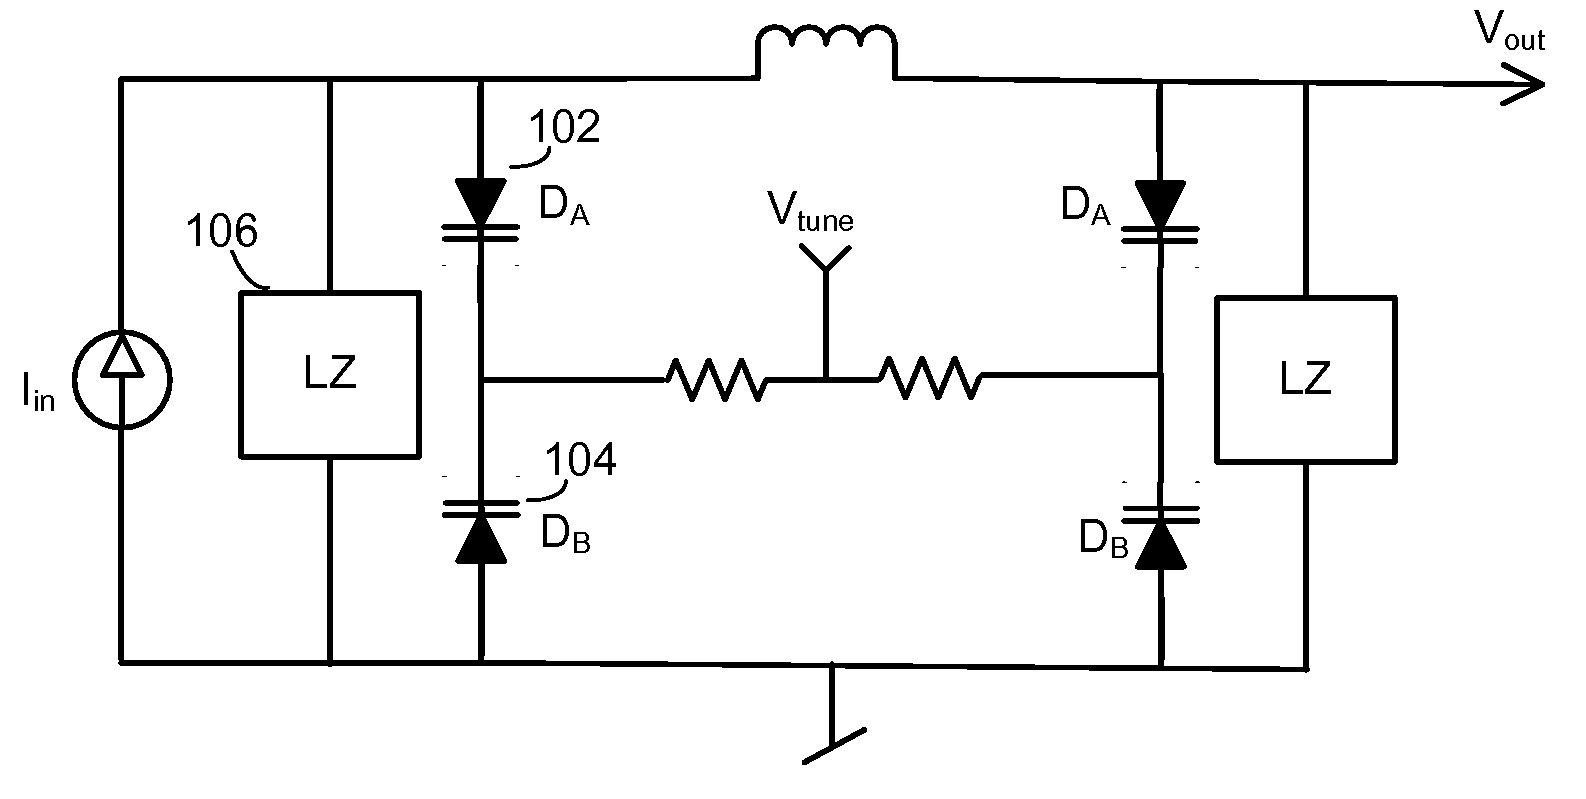 Distortion reduction for variable capacitance devices